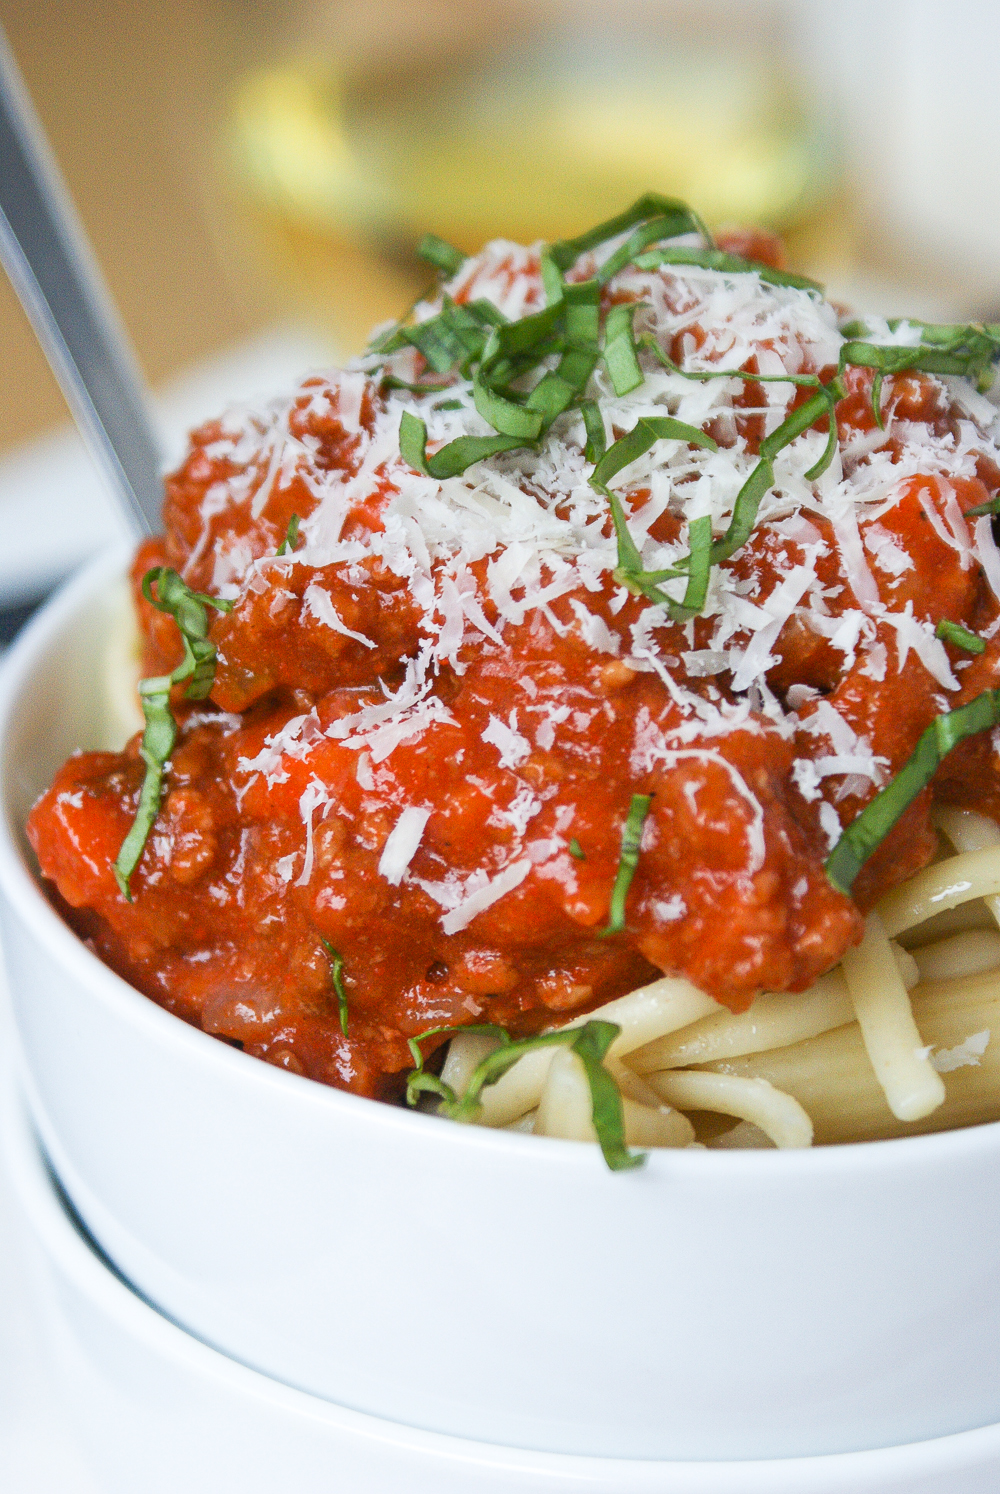 Flavorful, make it and leave it, delicious Bolognese style pasta sauce